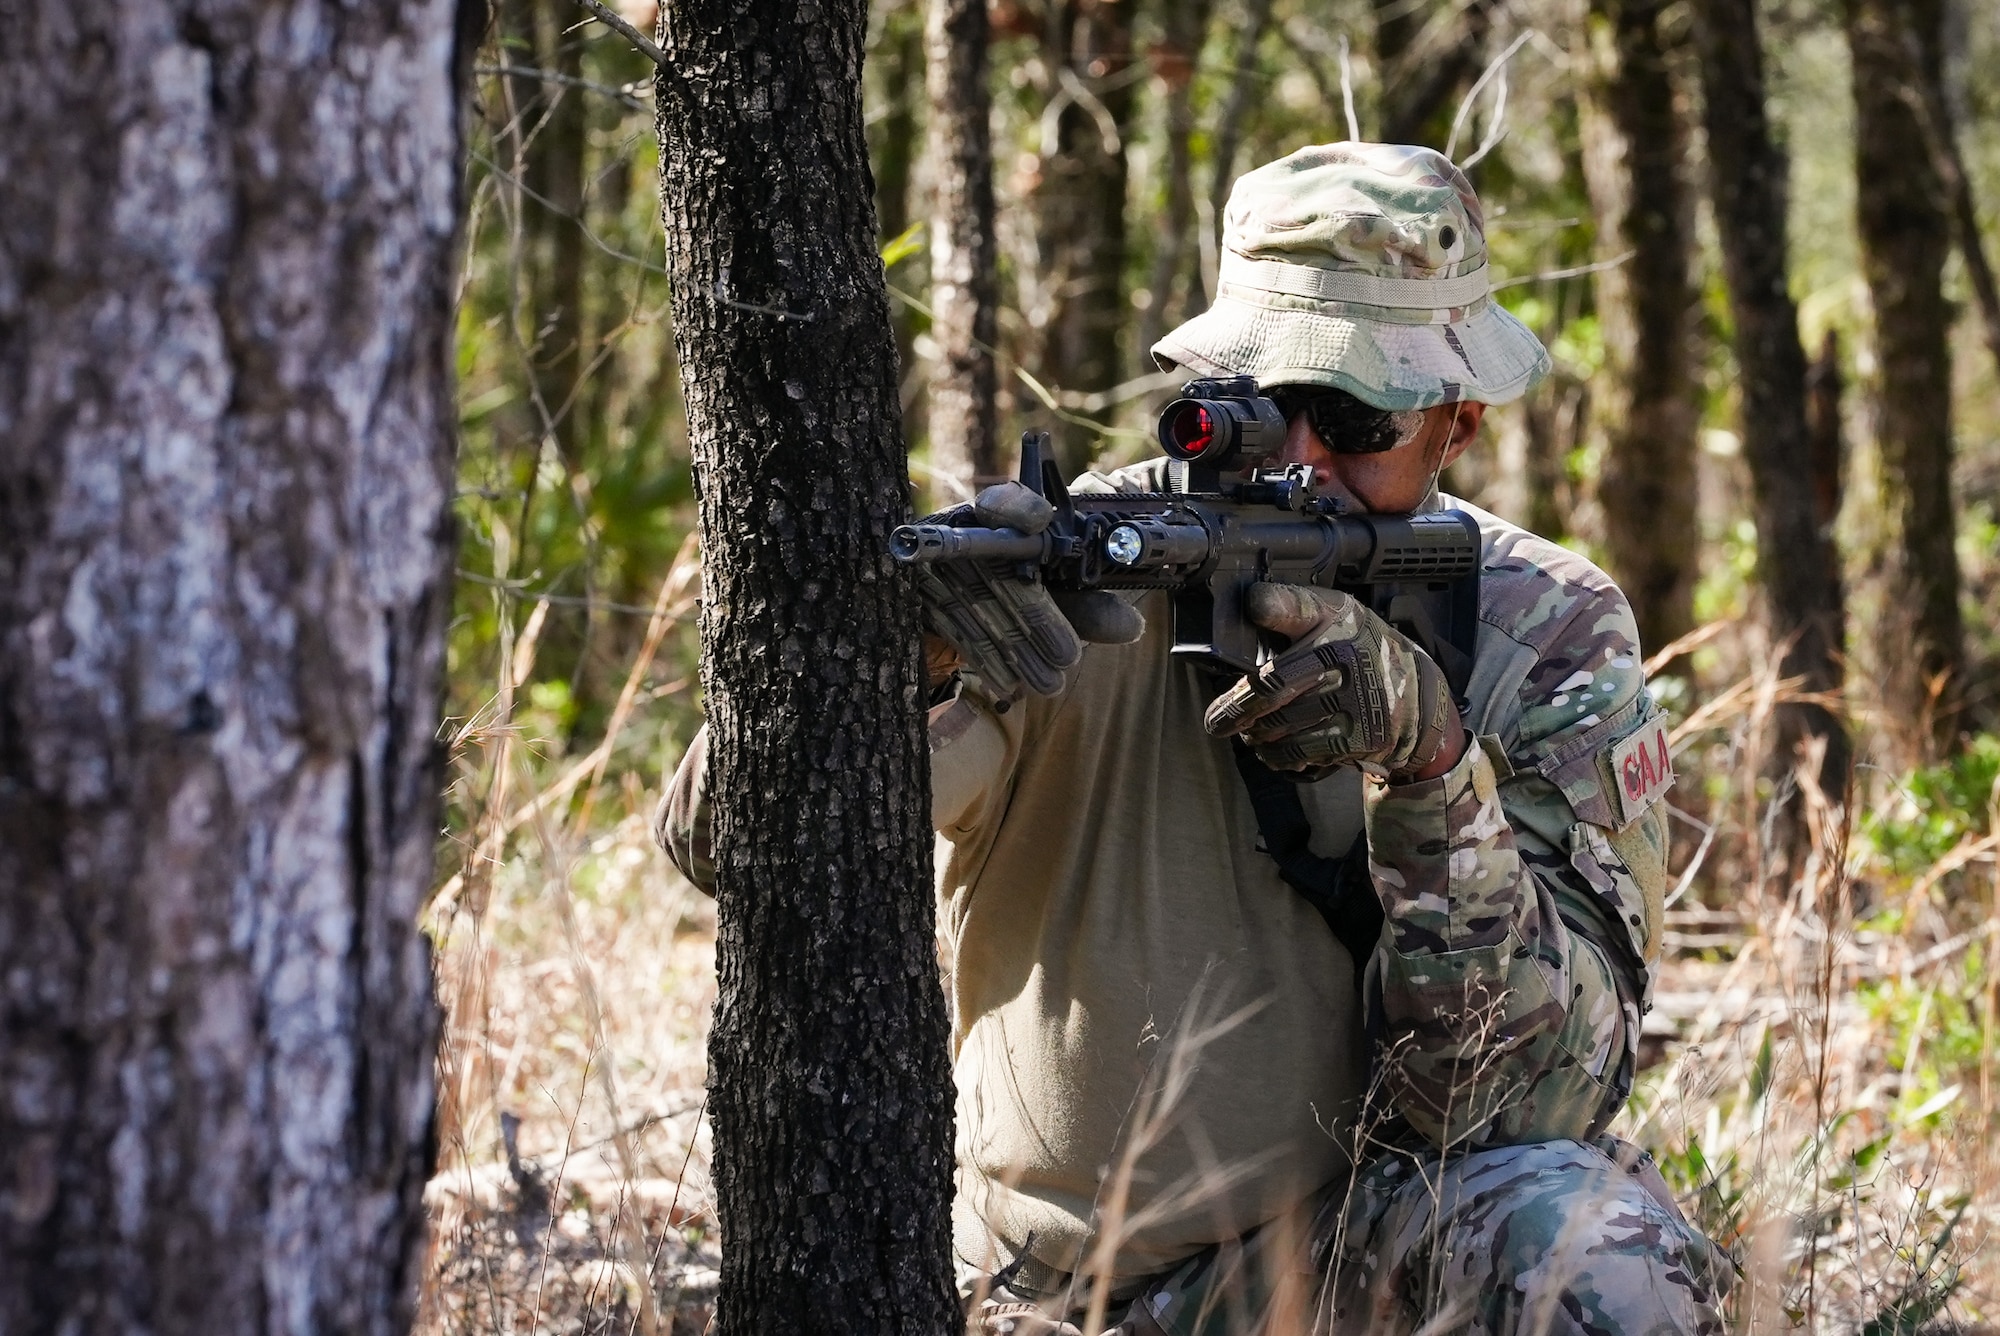 A kneeling Airman aims a weapon around a tree.